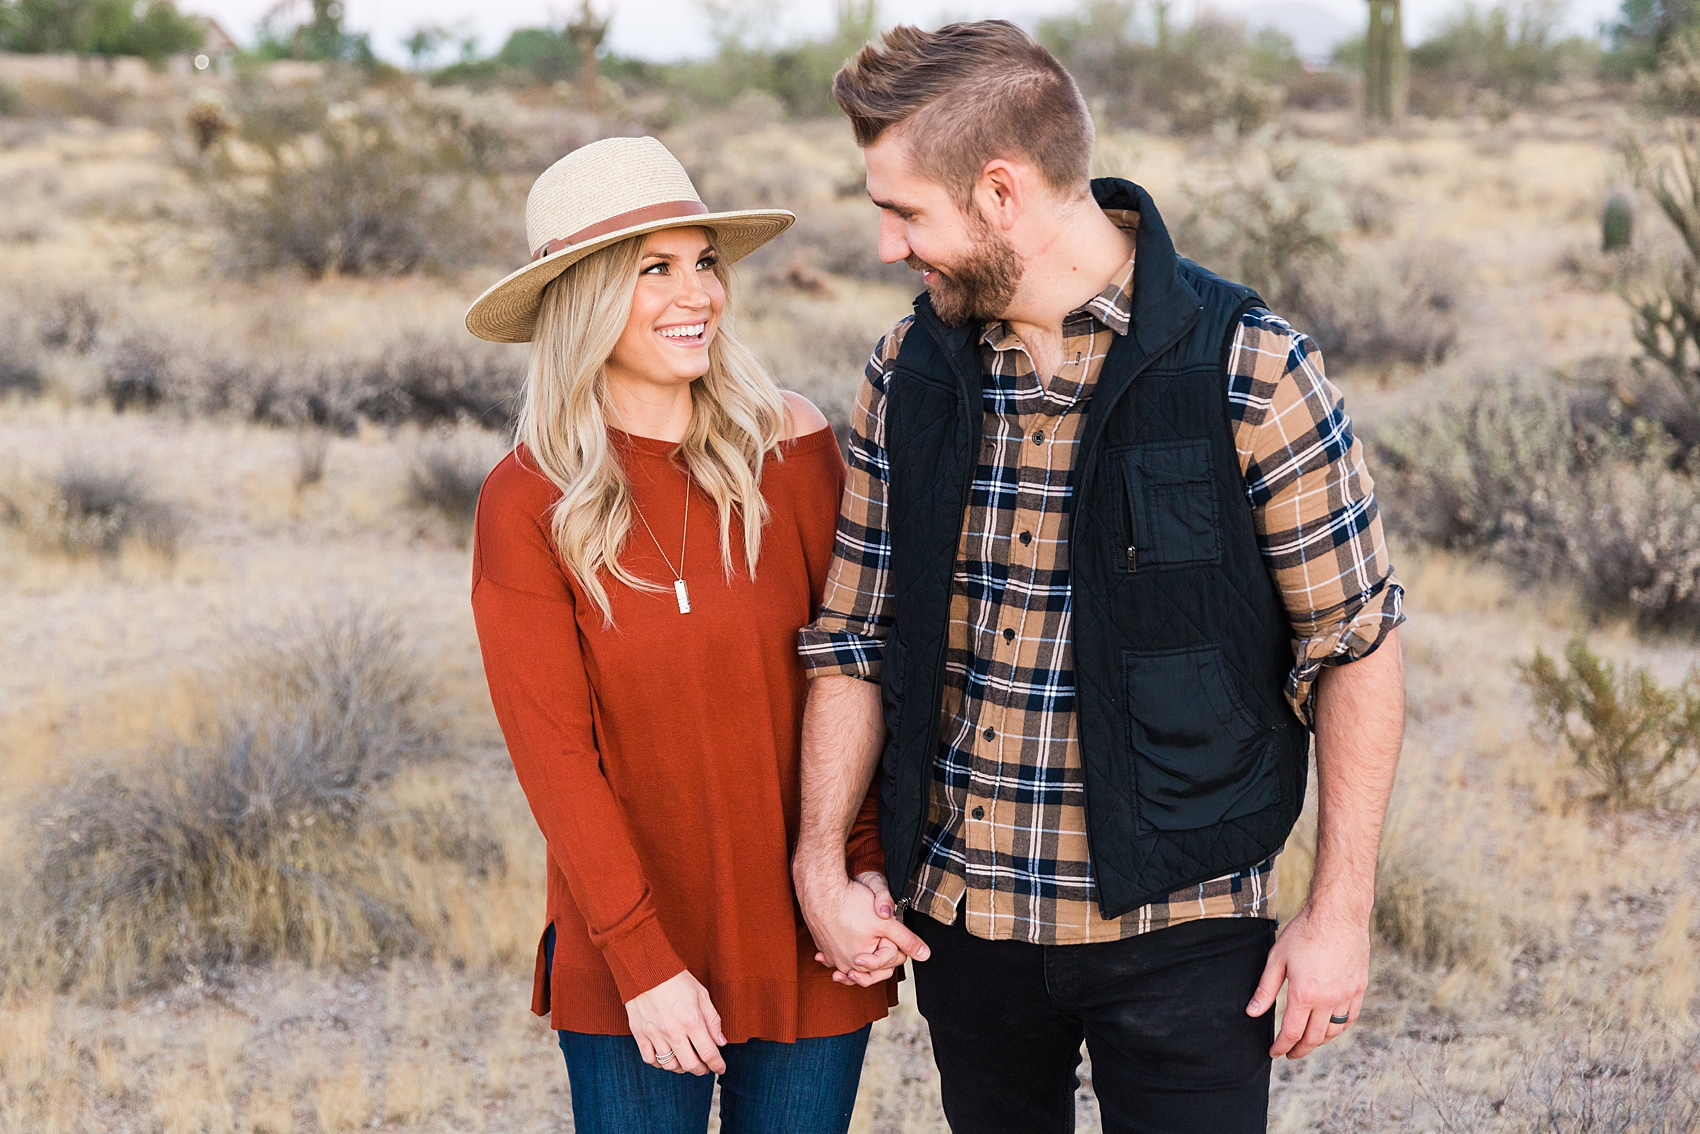 Leah Hope Photography | Scottsdale Phoenix Arizona | Desert Landscape Cactus Scenery | Sunset Golden Hour Family Photos | Family Pictures | What to Wear | Family Poses | Coordinating Outfits